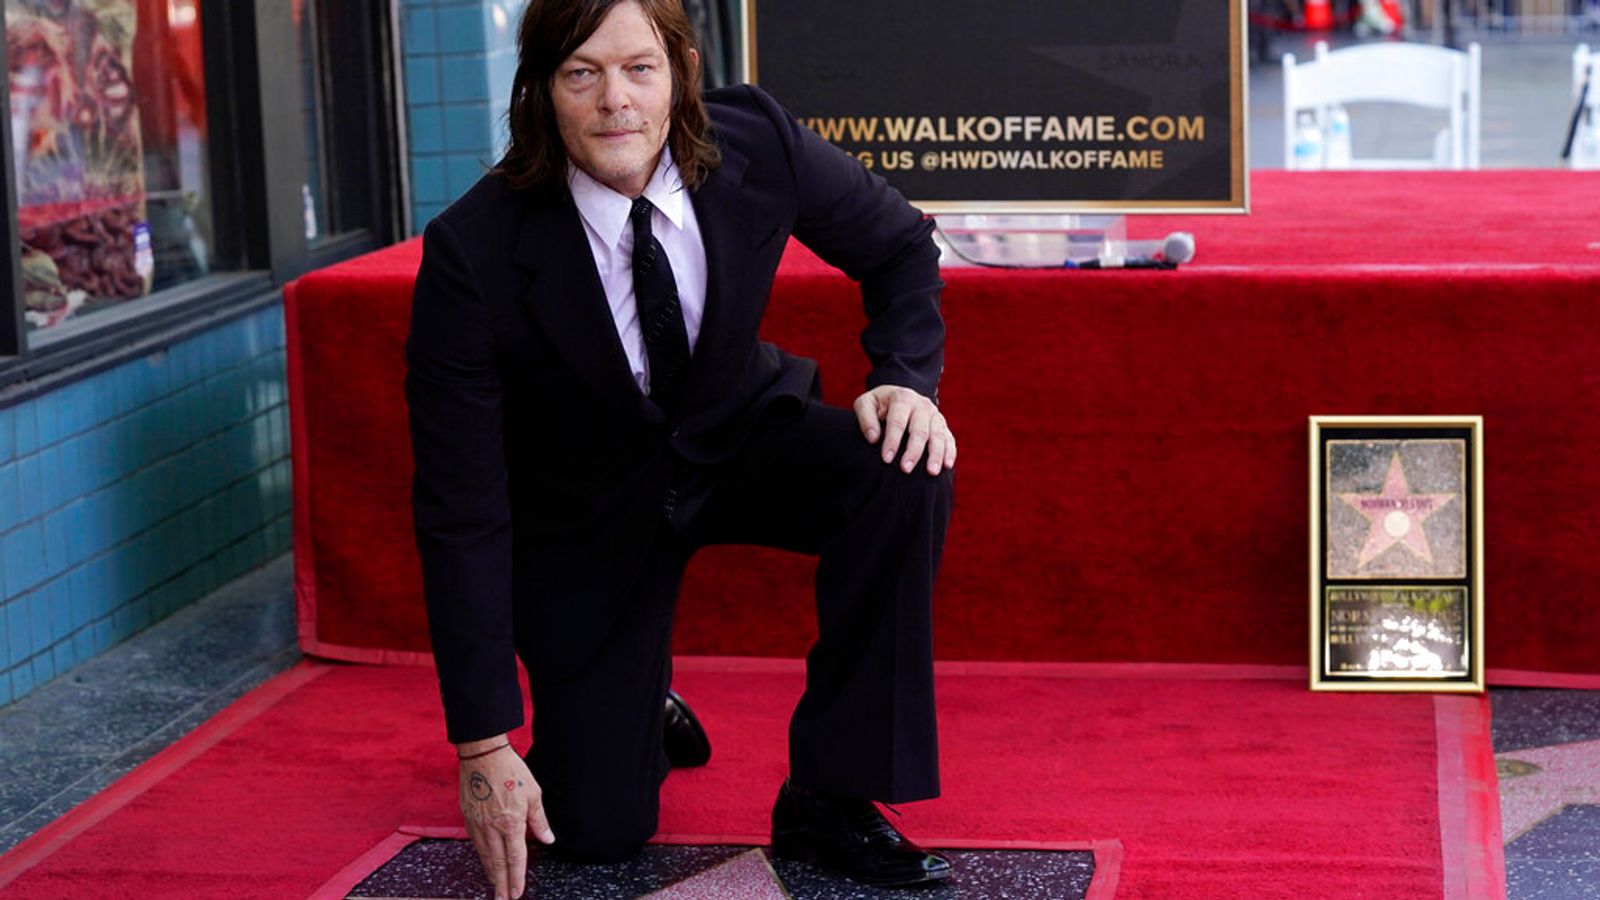 The Walking Dead star Norman Reedus gets a star on Hollywood's Walk of Fame